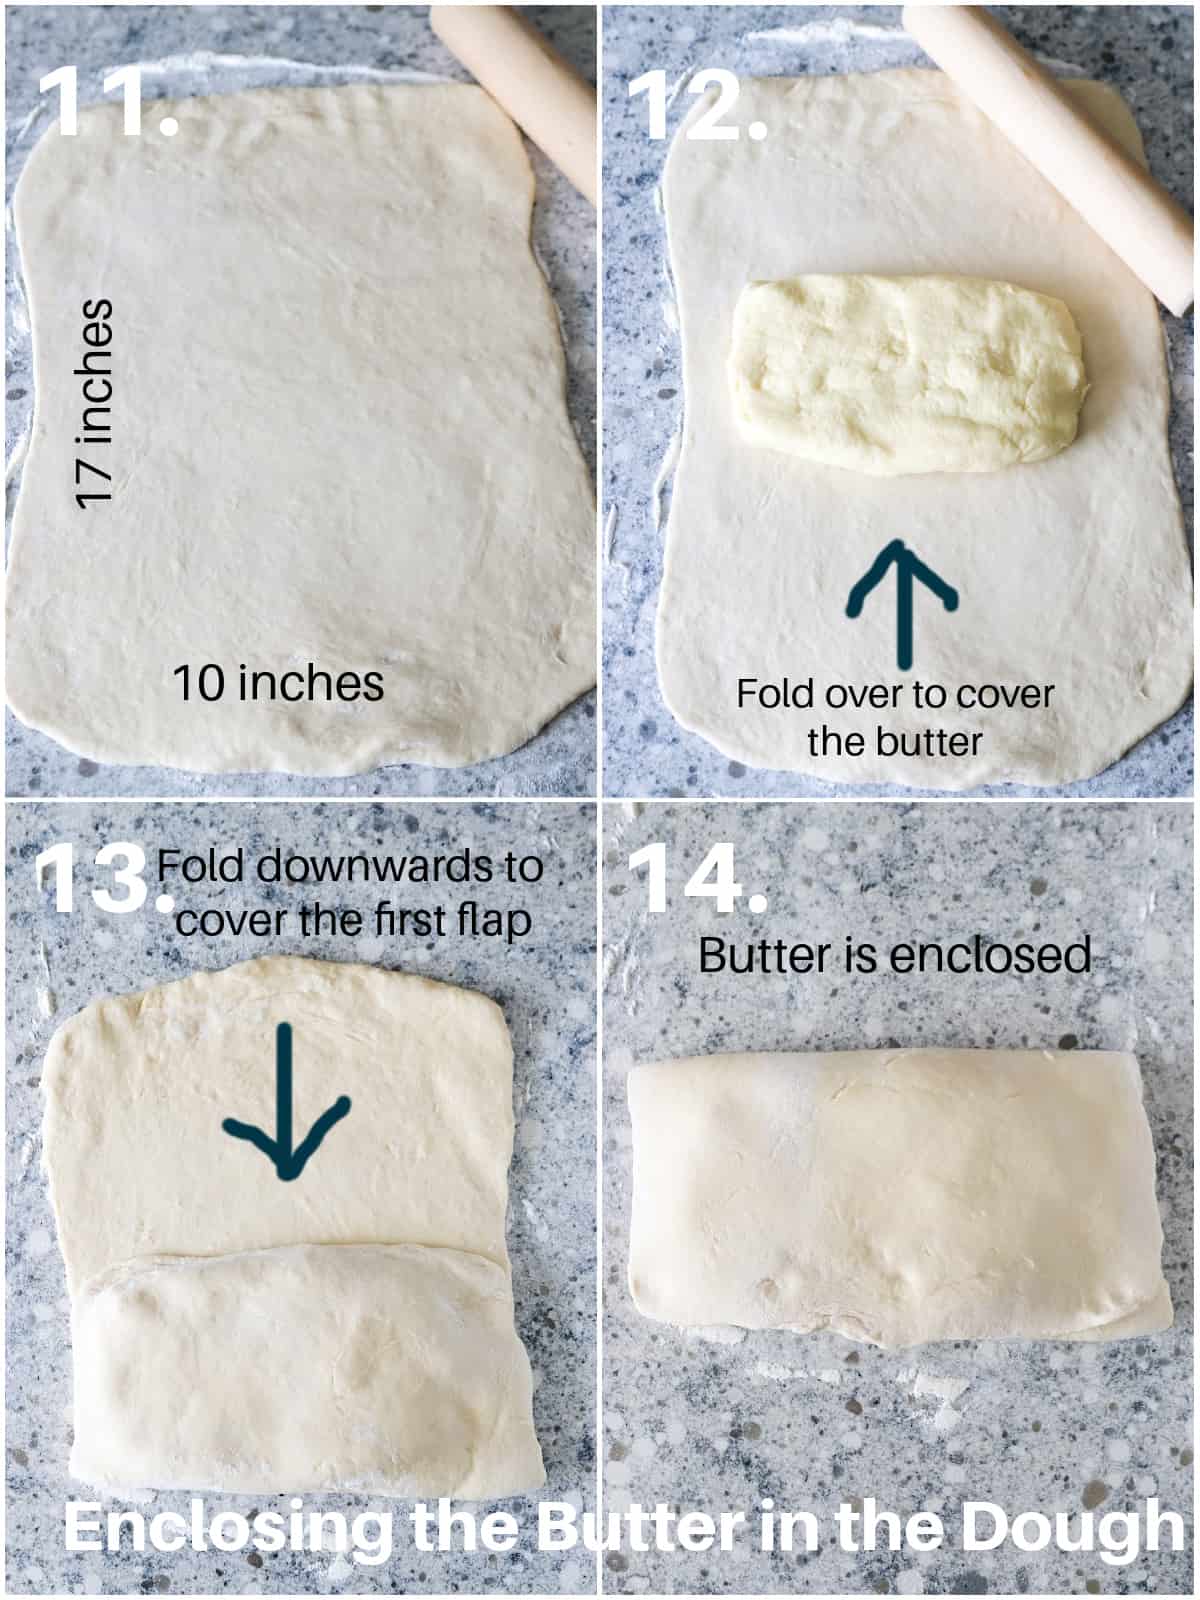 Enclosing the butter block in the croissants.